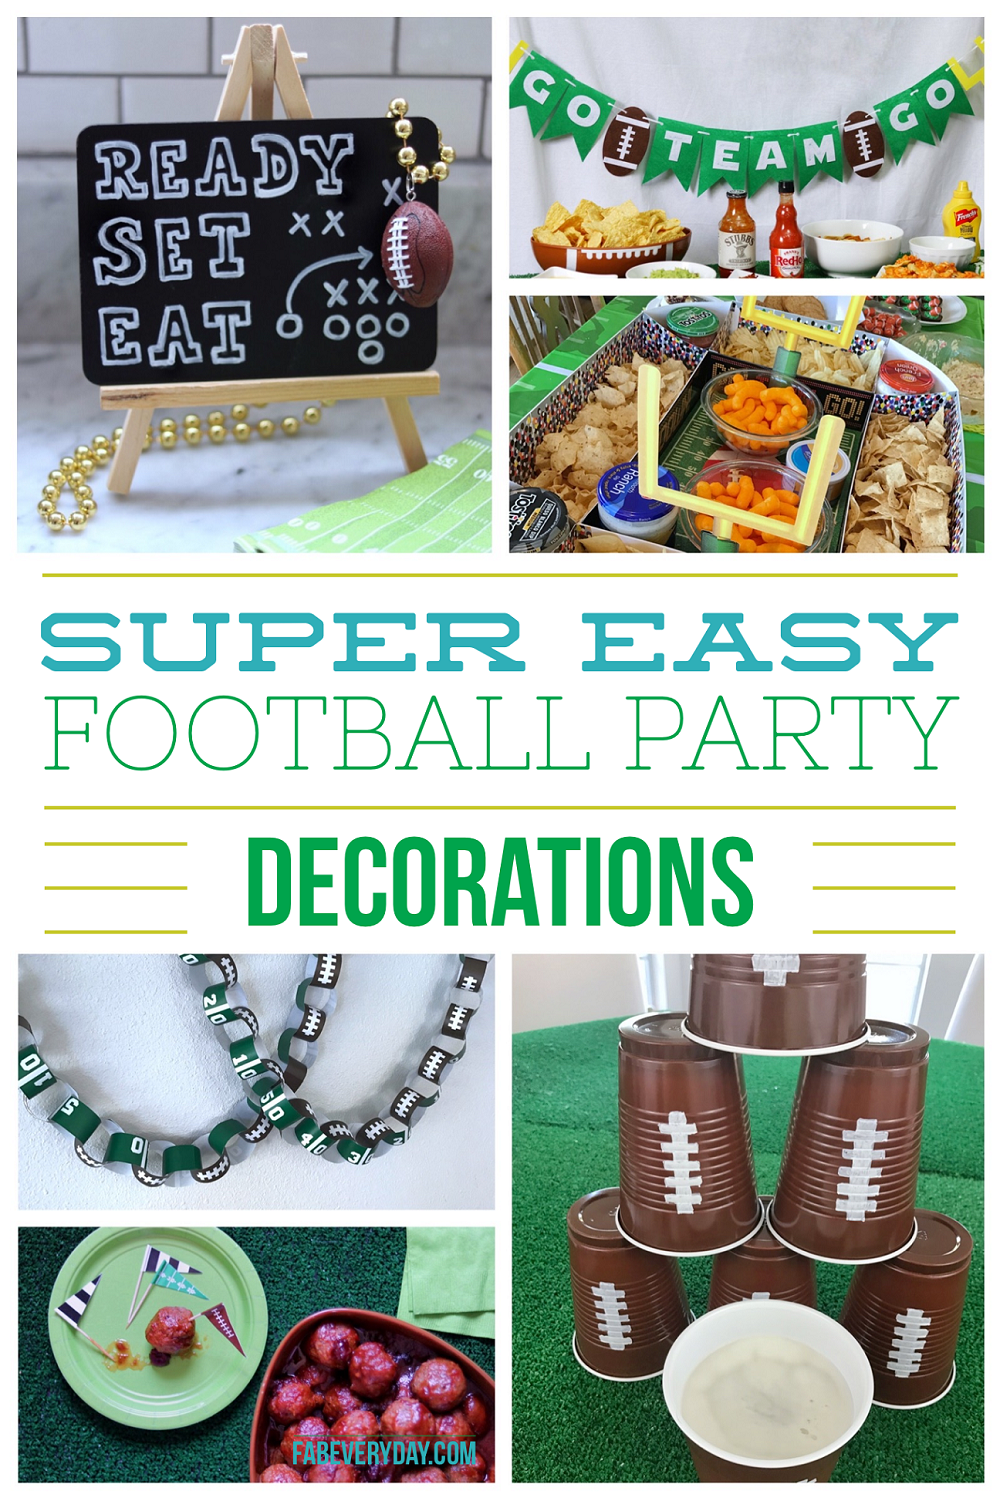 Super easy football party decorations - Just in time for the big game